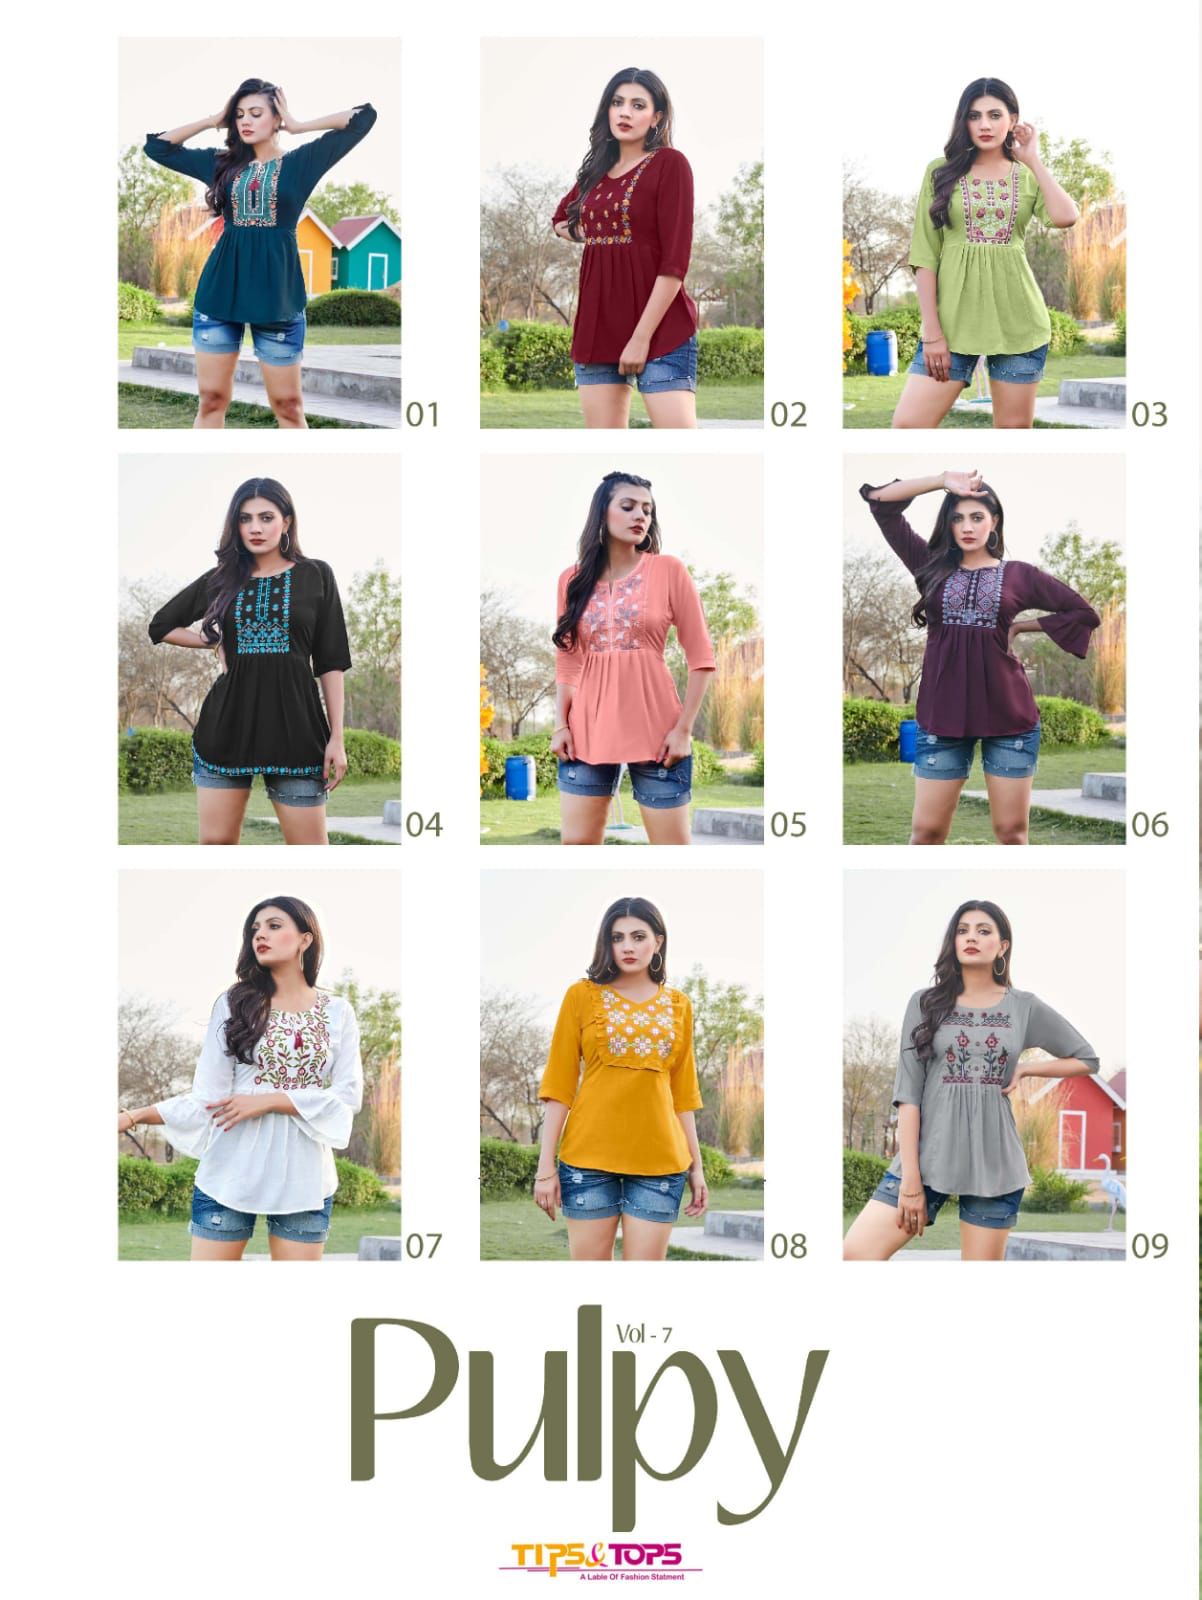 Tips And Tops Pulpy 01-09